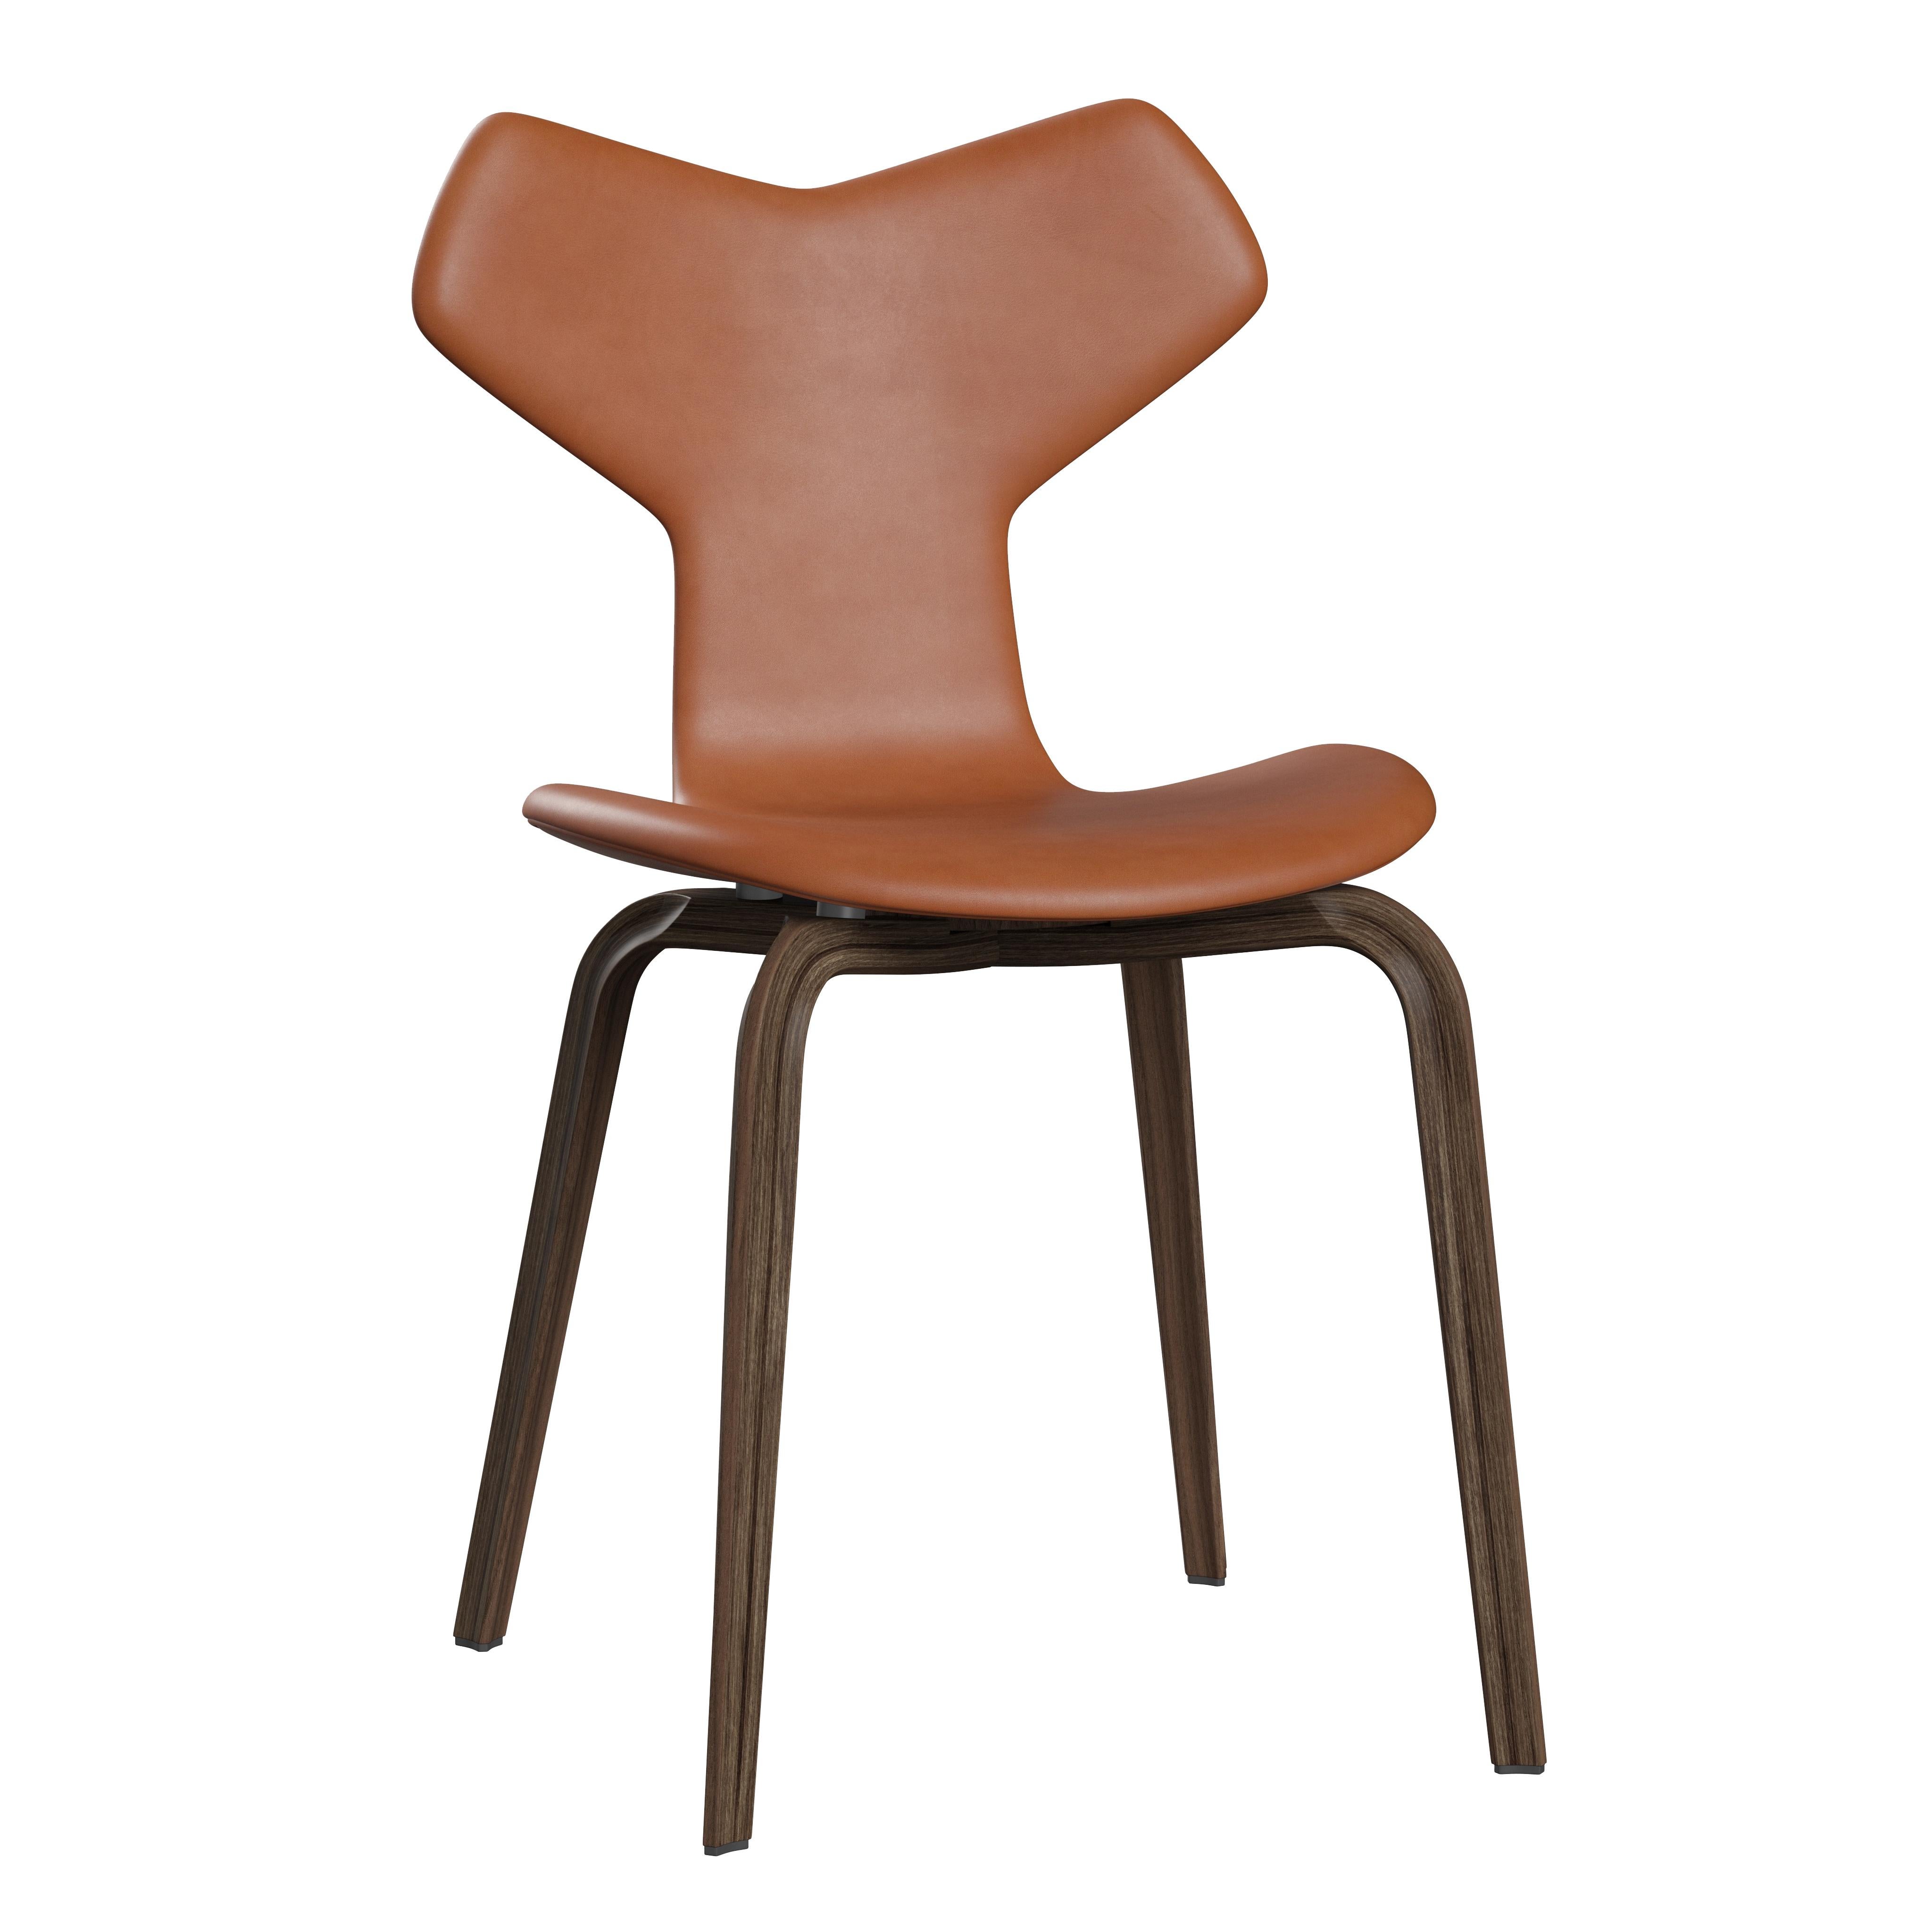 Arne Jacobsen 'Grand Prix' Chair for Fritz Hansen in Full Leather Upholstery.
 
Established in 1872, Fritz Hansen has become synonymous with legendary Danish design. Combining timeless craftsmanship with an emphasis on sustainability, the brand’s